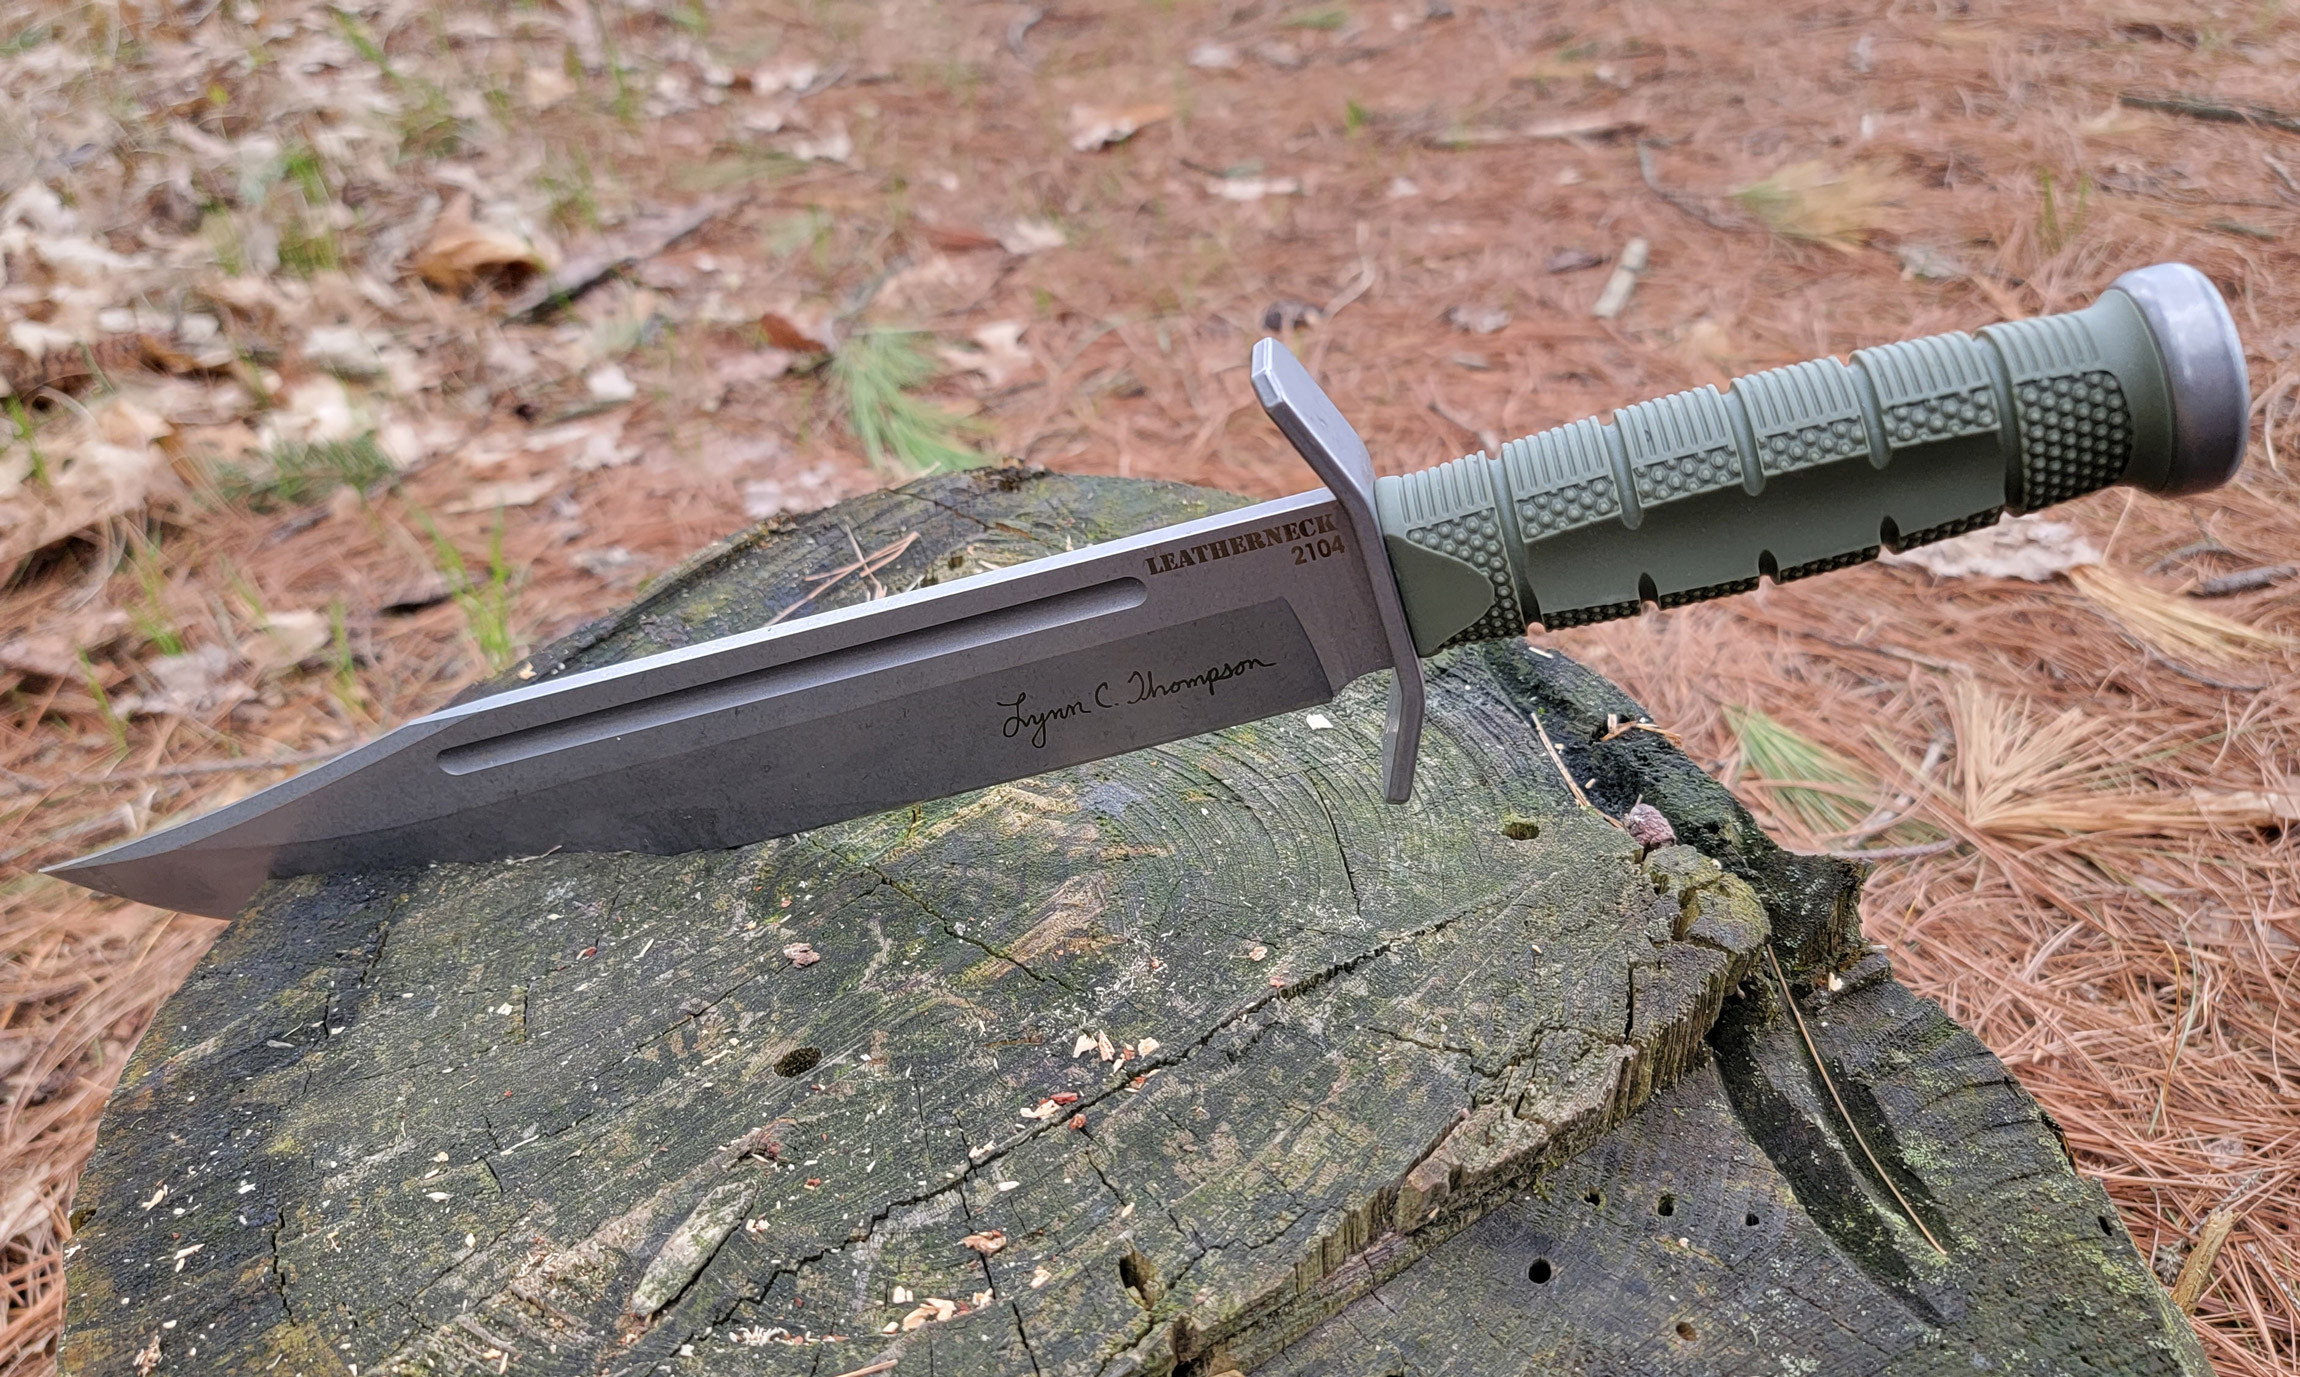 Big, Dumb Fun: Cold Steel Lynn Thompson Leatherneck Bowie Review